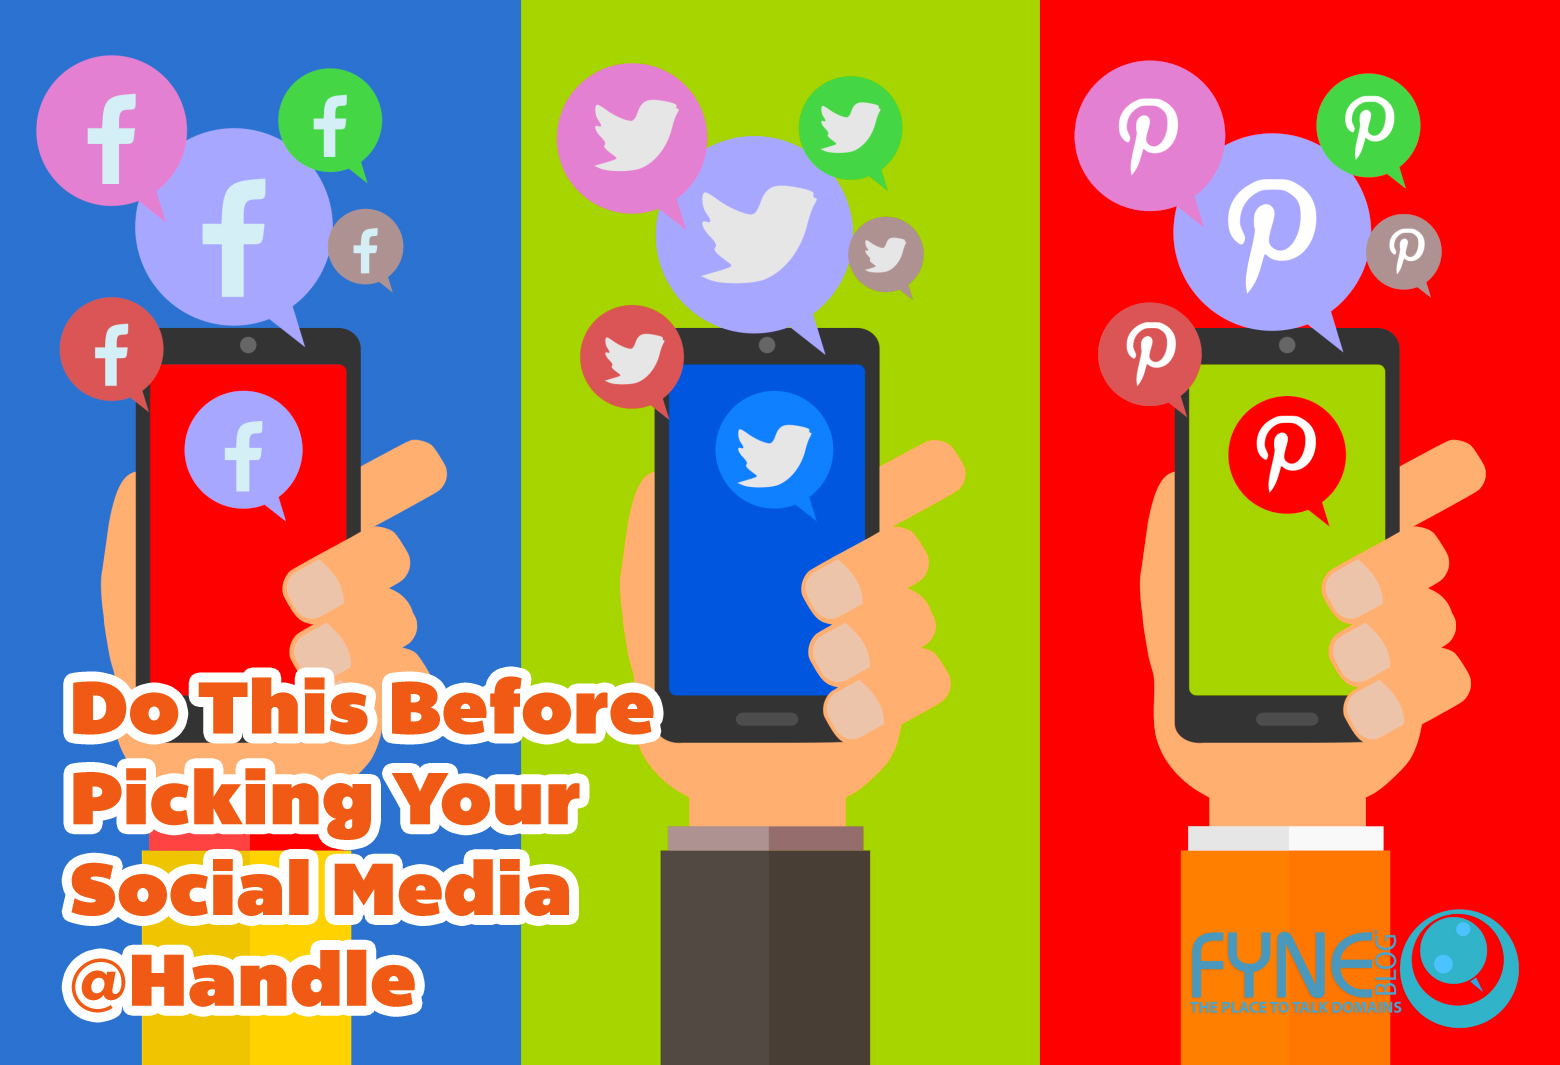 FYNE Blog Explains Why You Should Do This Before Picking Your Social Media Handle